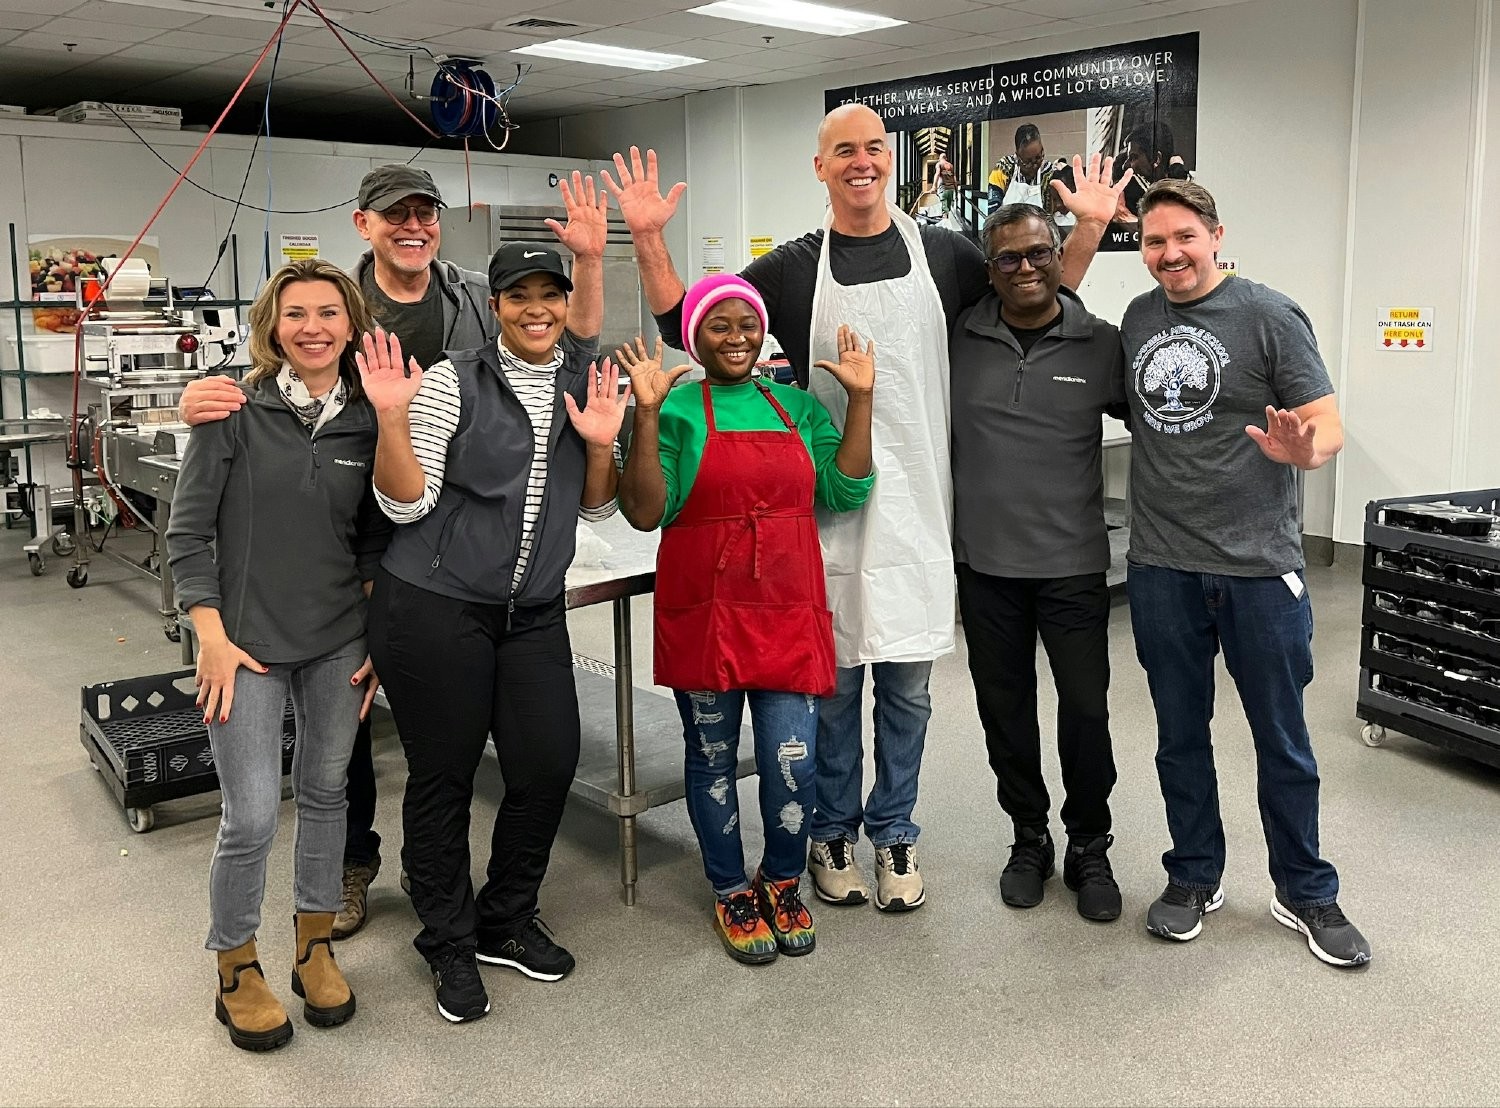 MeridianLink gives back! Employees spend the day packaging meals at Open Hand Atlanta for members of the community.